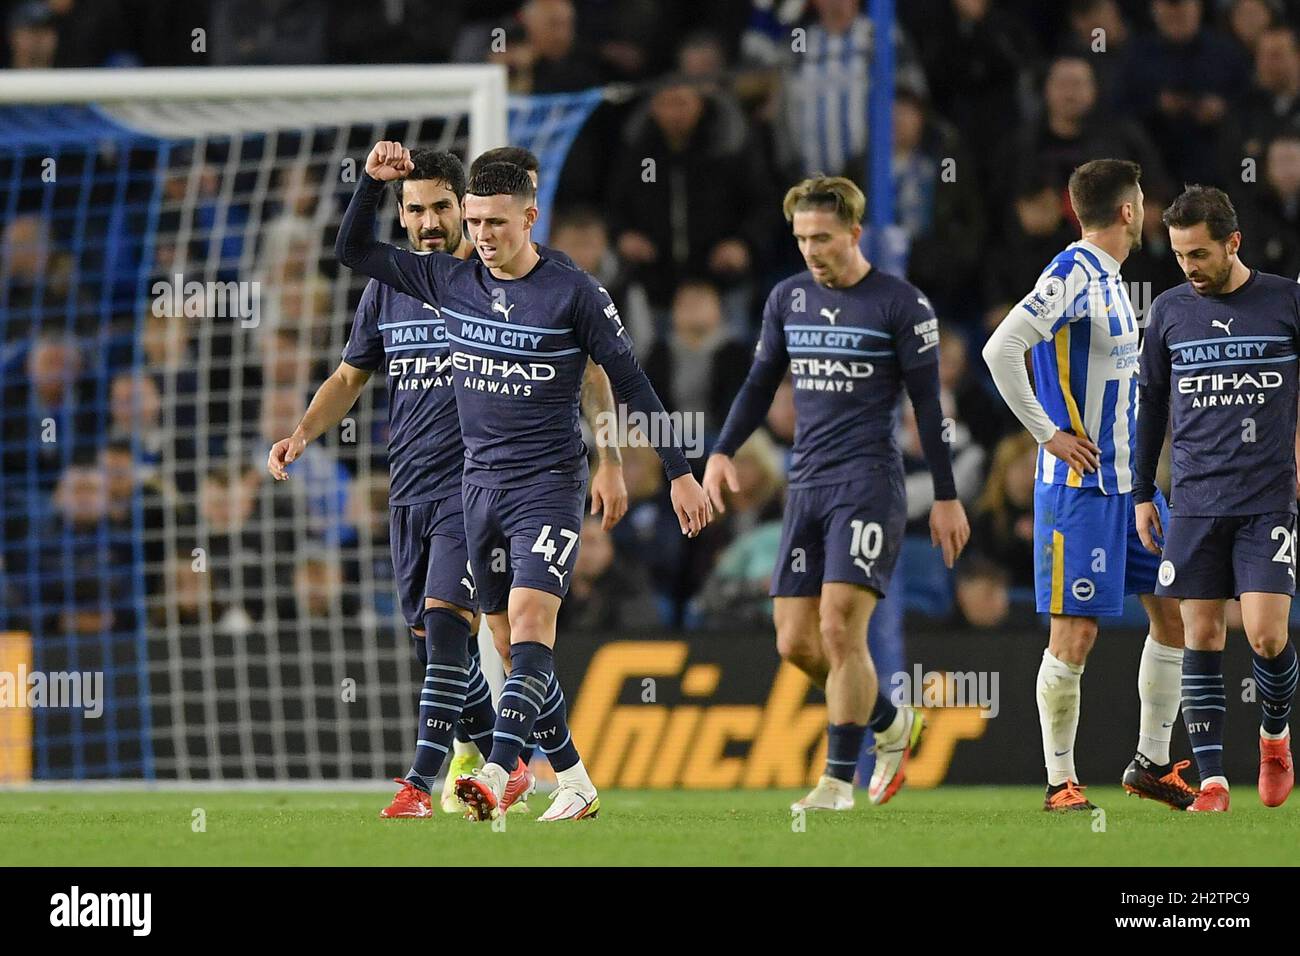 BRIGHTON, ENGLAND - OCTOBER 23: Phil Foden of Manchester City celebrates scoring his sides second goal during the Premier League match between Brighton & Hove Albion and Manchester City at American Express Community Stadium on October 23, 2021 in Brighton, England. MB Media Stock Photo